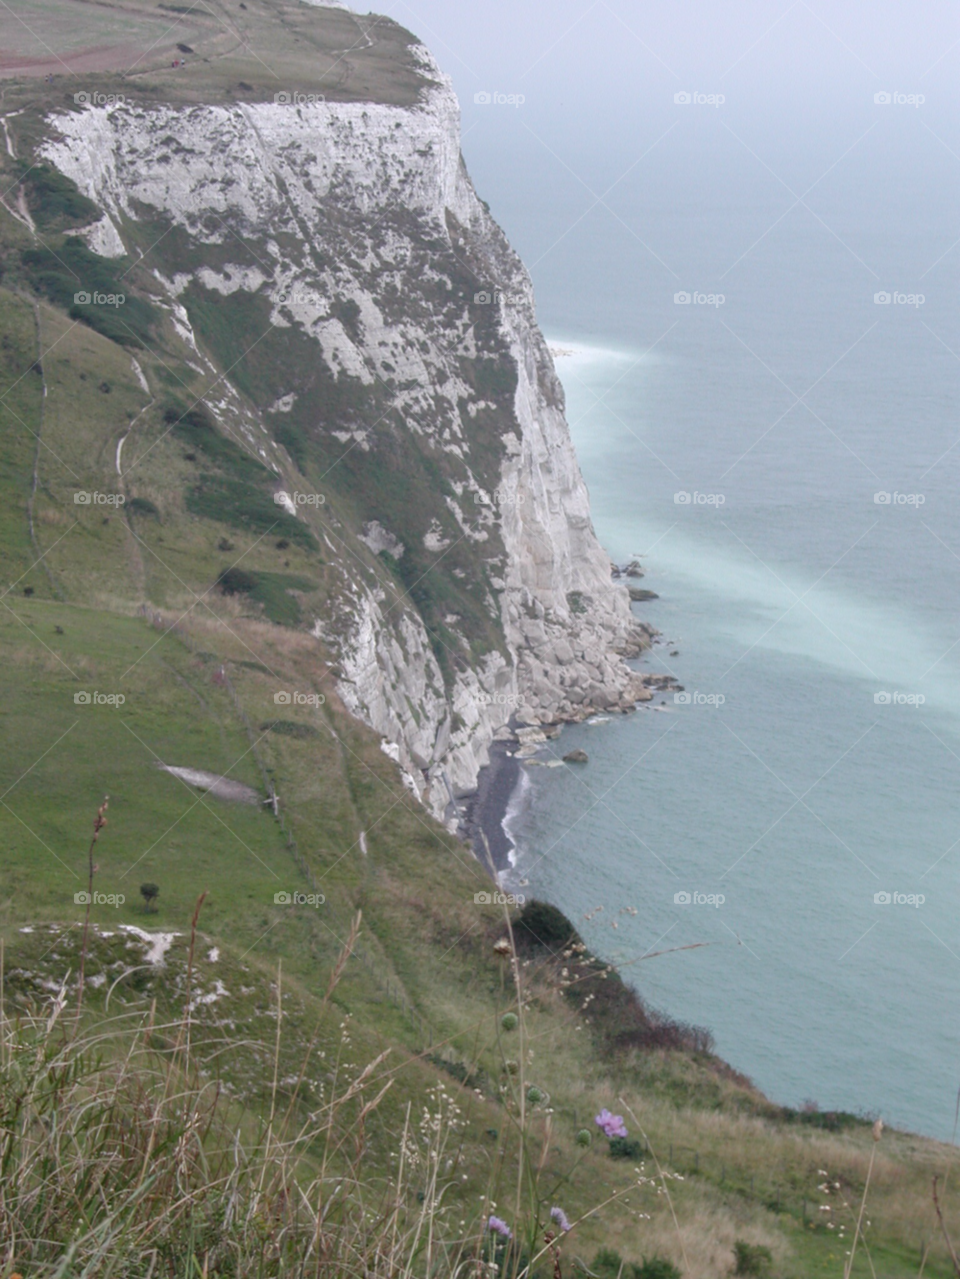 dover kent kent dover white cliffs by invasion1973